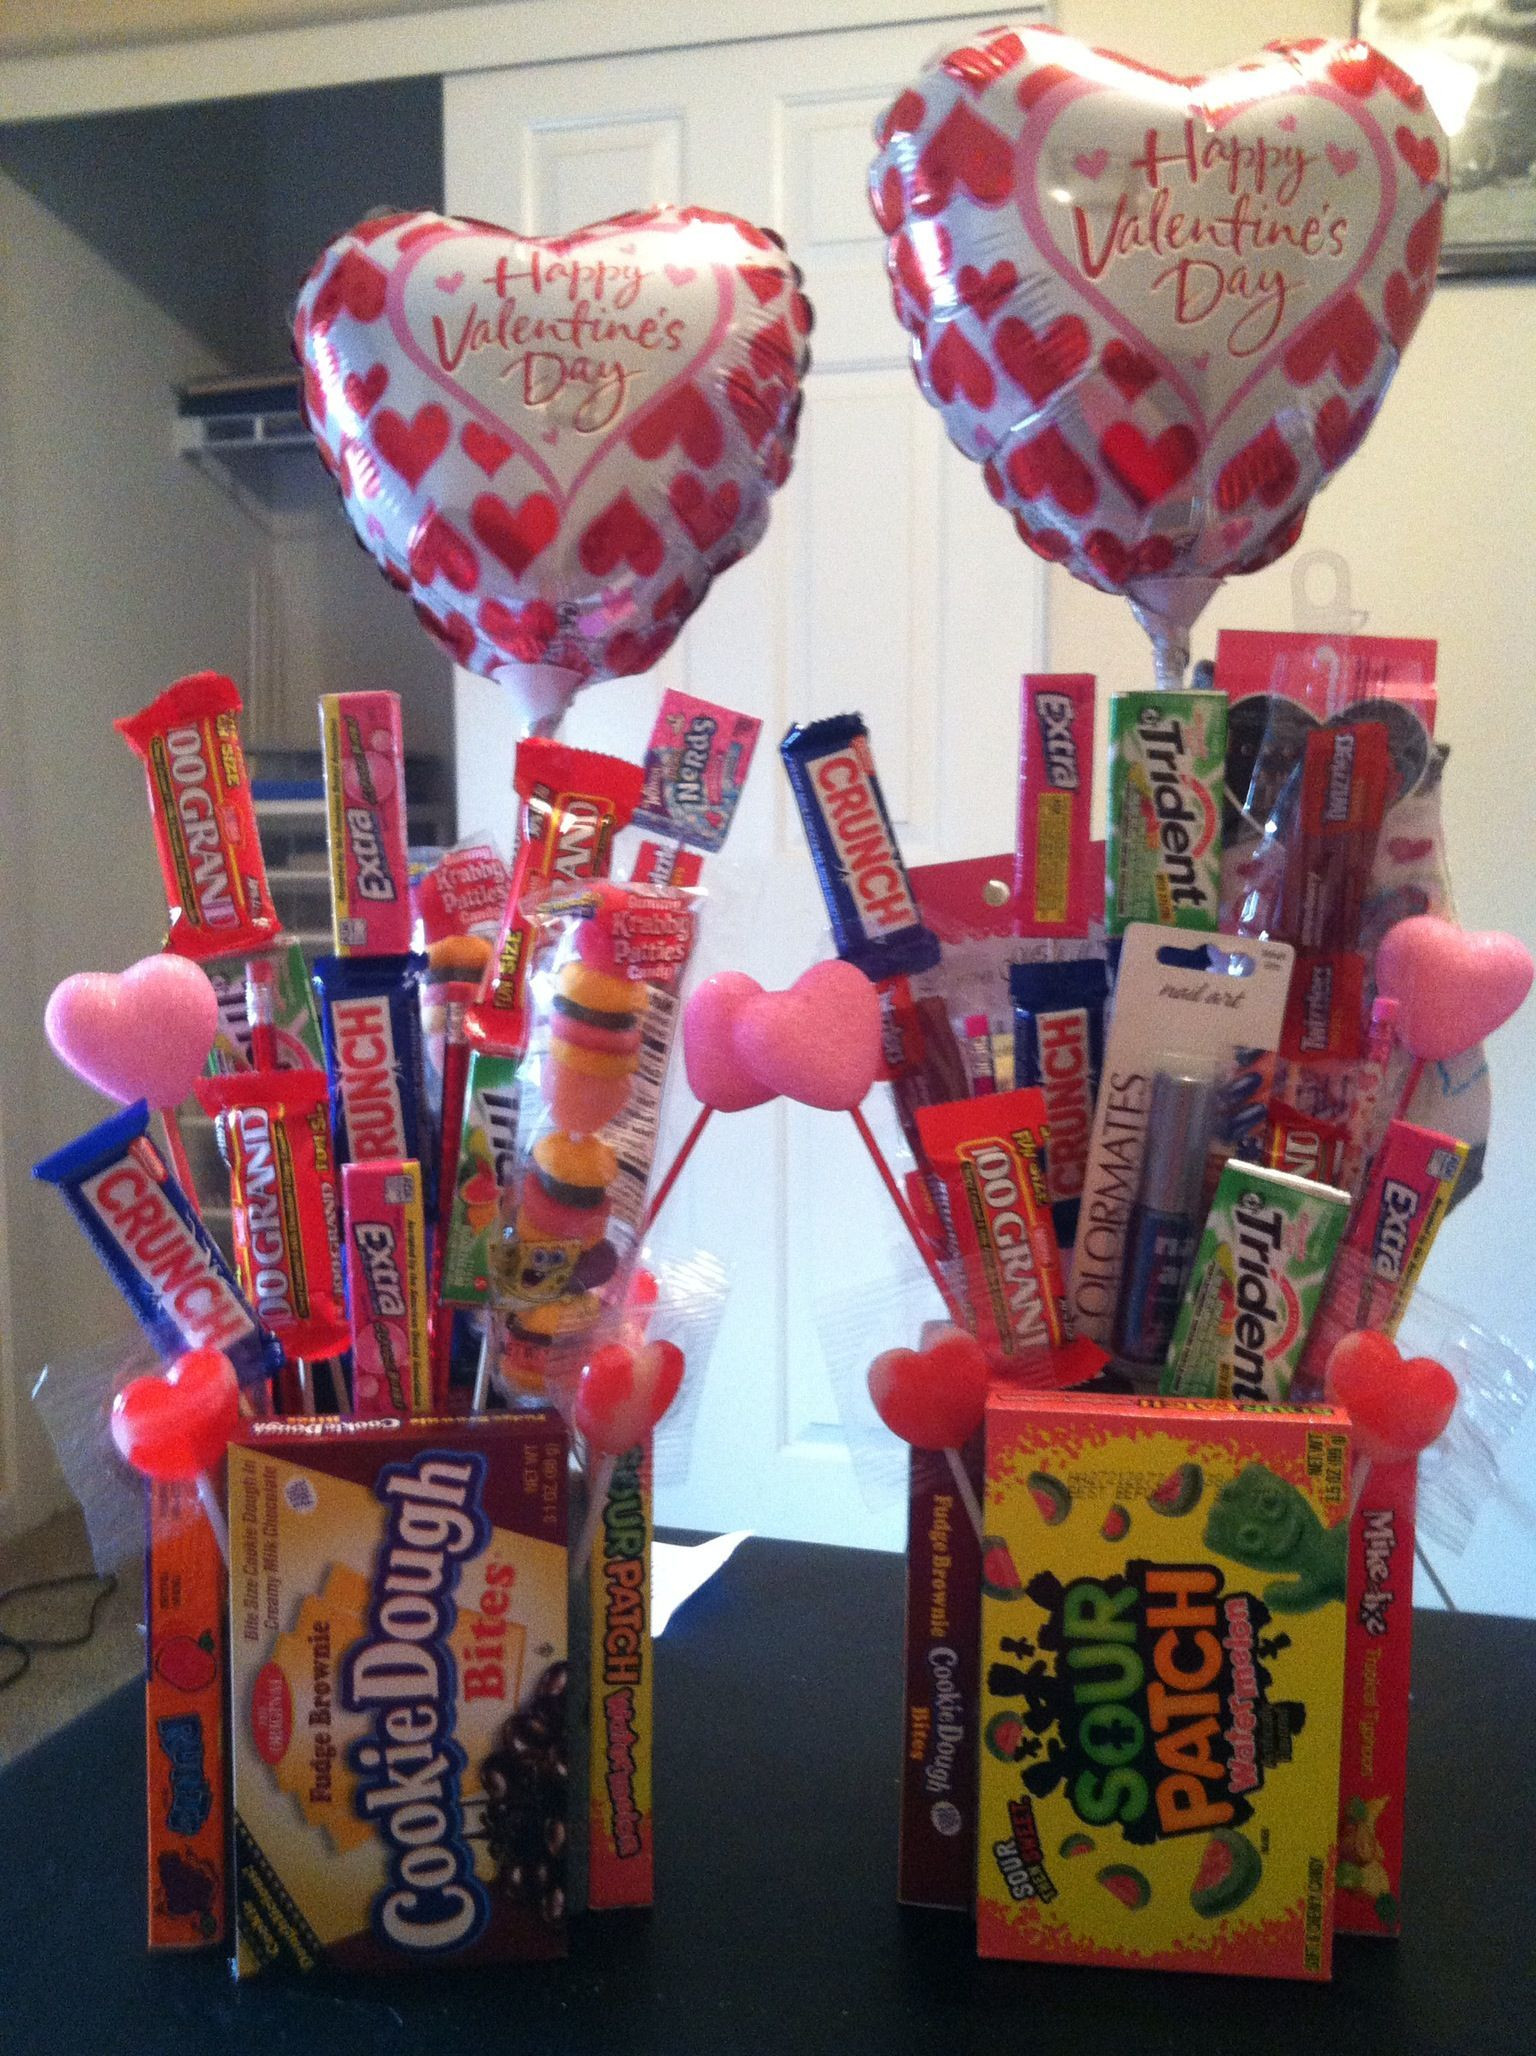 Valentines Candy Gift Ideas
 30 Inspiring DIY Gift Baskets Ideas for Any and All